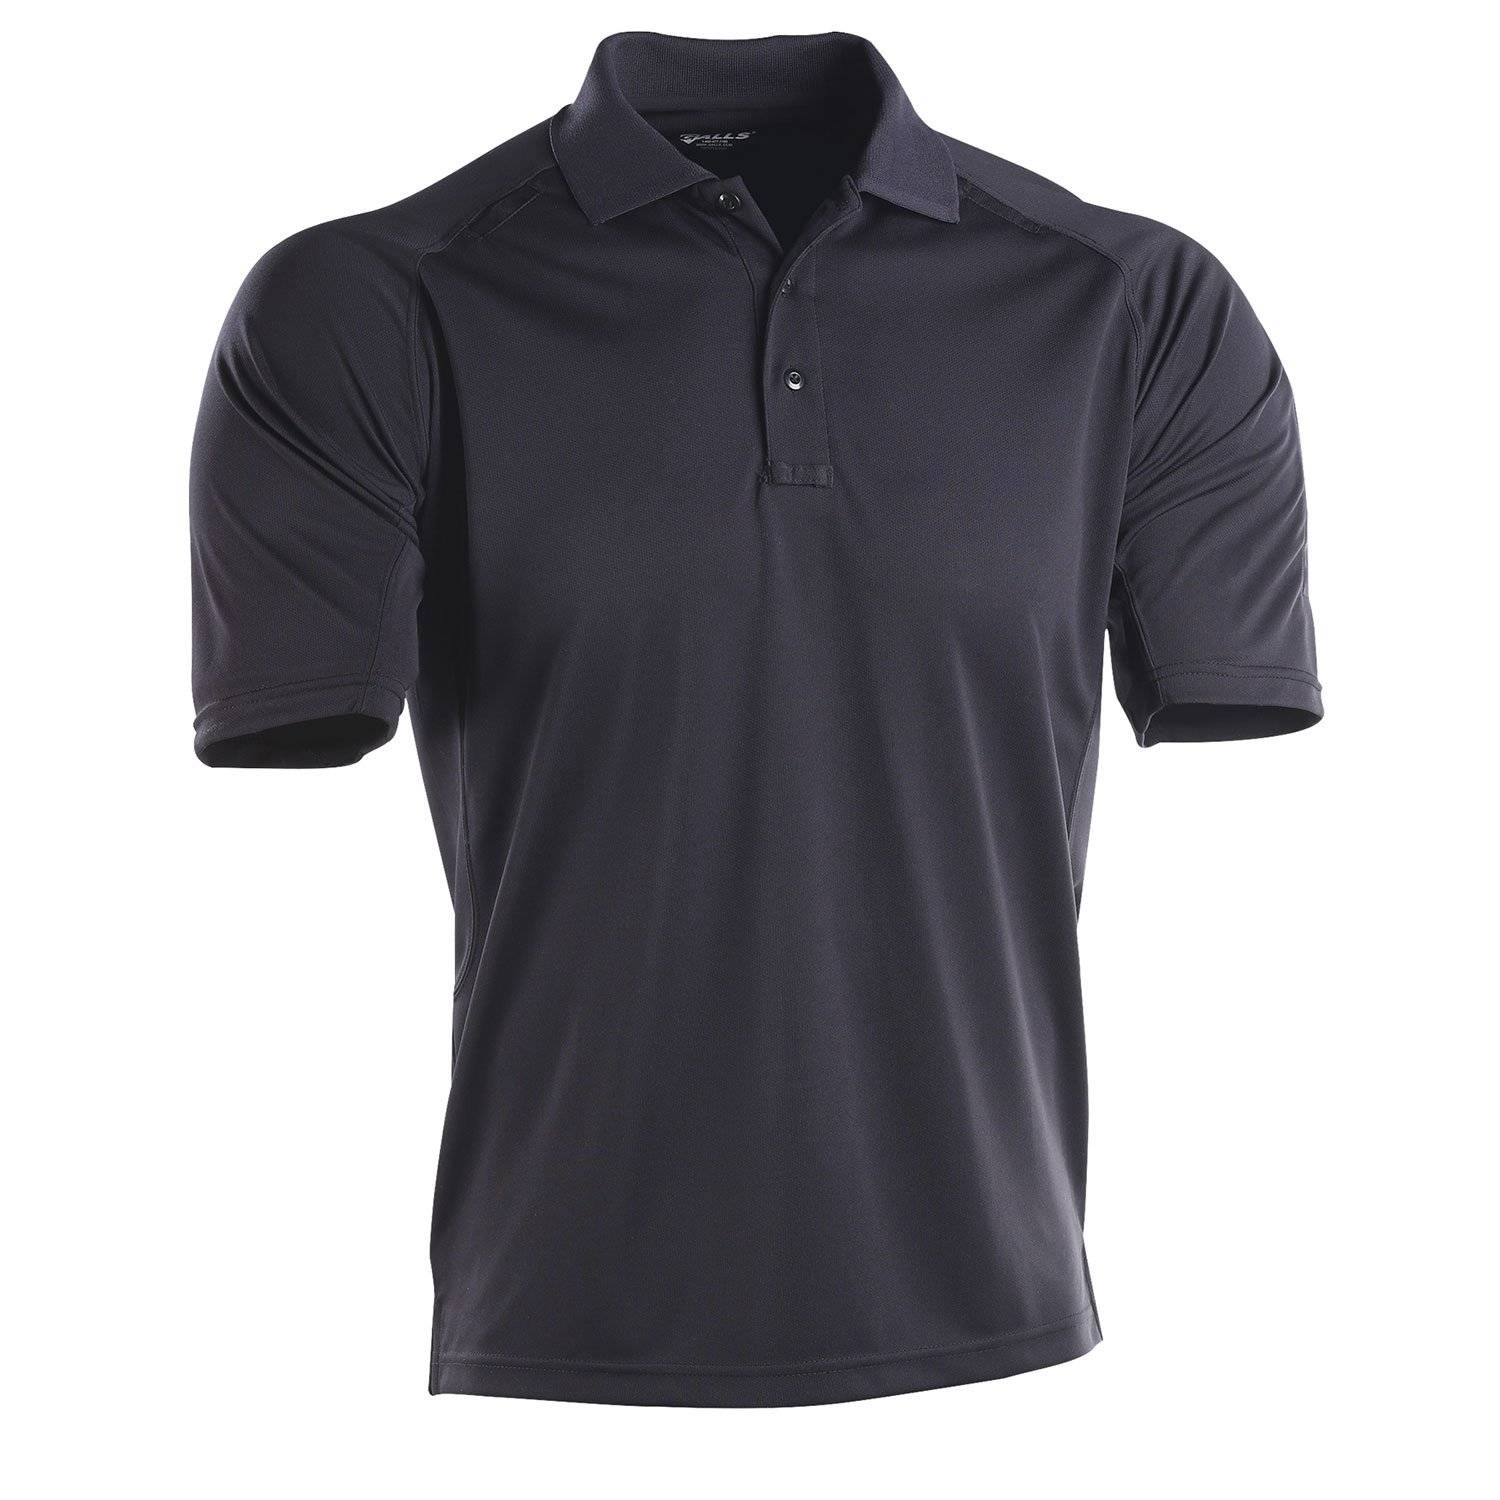 GALLS SHORT SLEEVE TAC FORCE MESH POLO